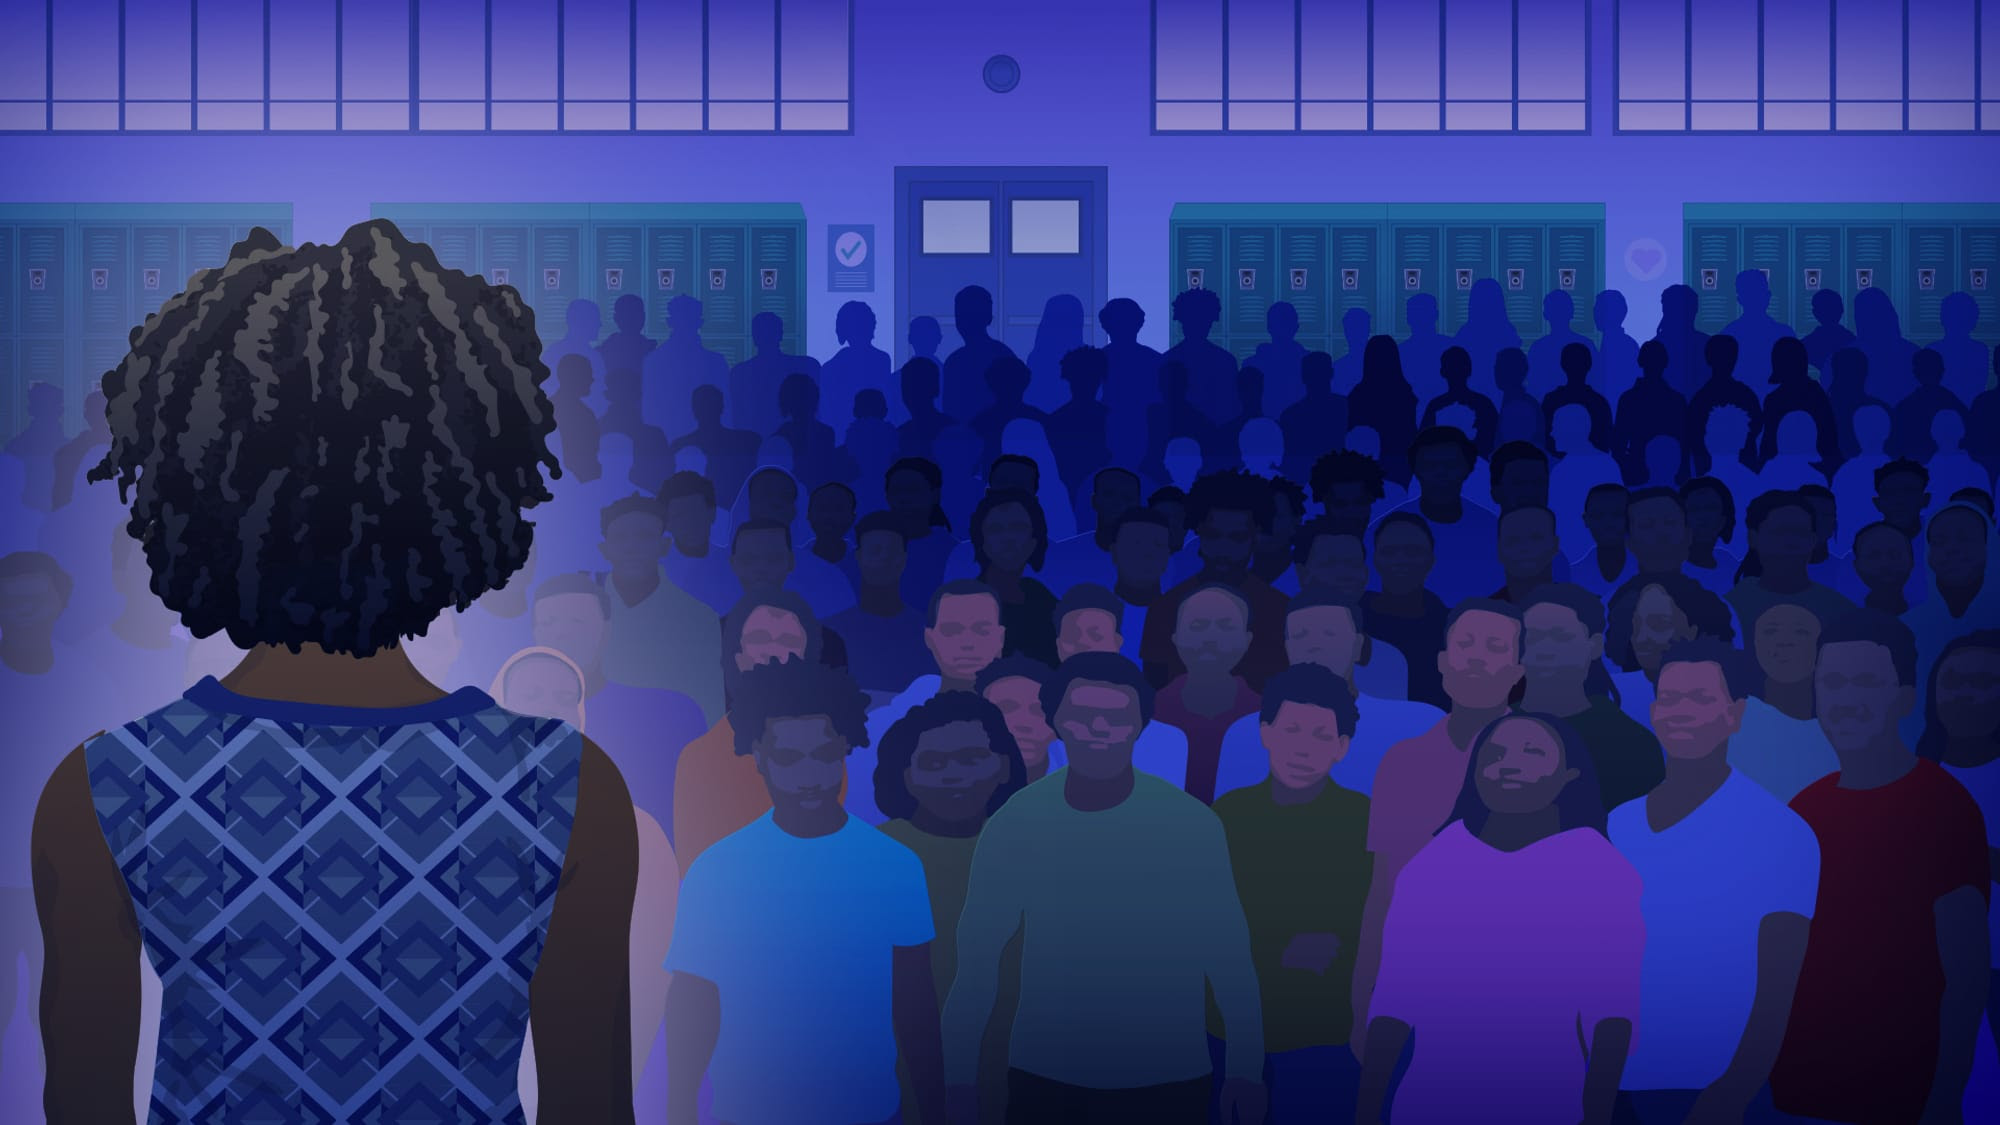 An illustration of a spotlit Black woman standing in front of a crowd of students, faculty, and staff in a gymnasium.